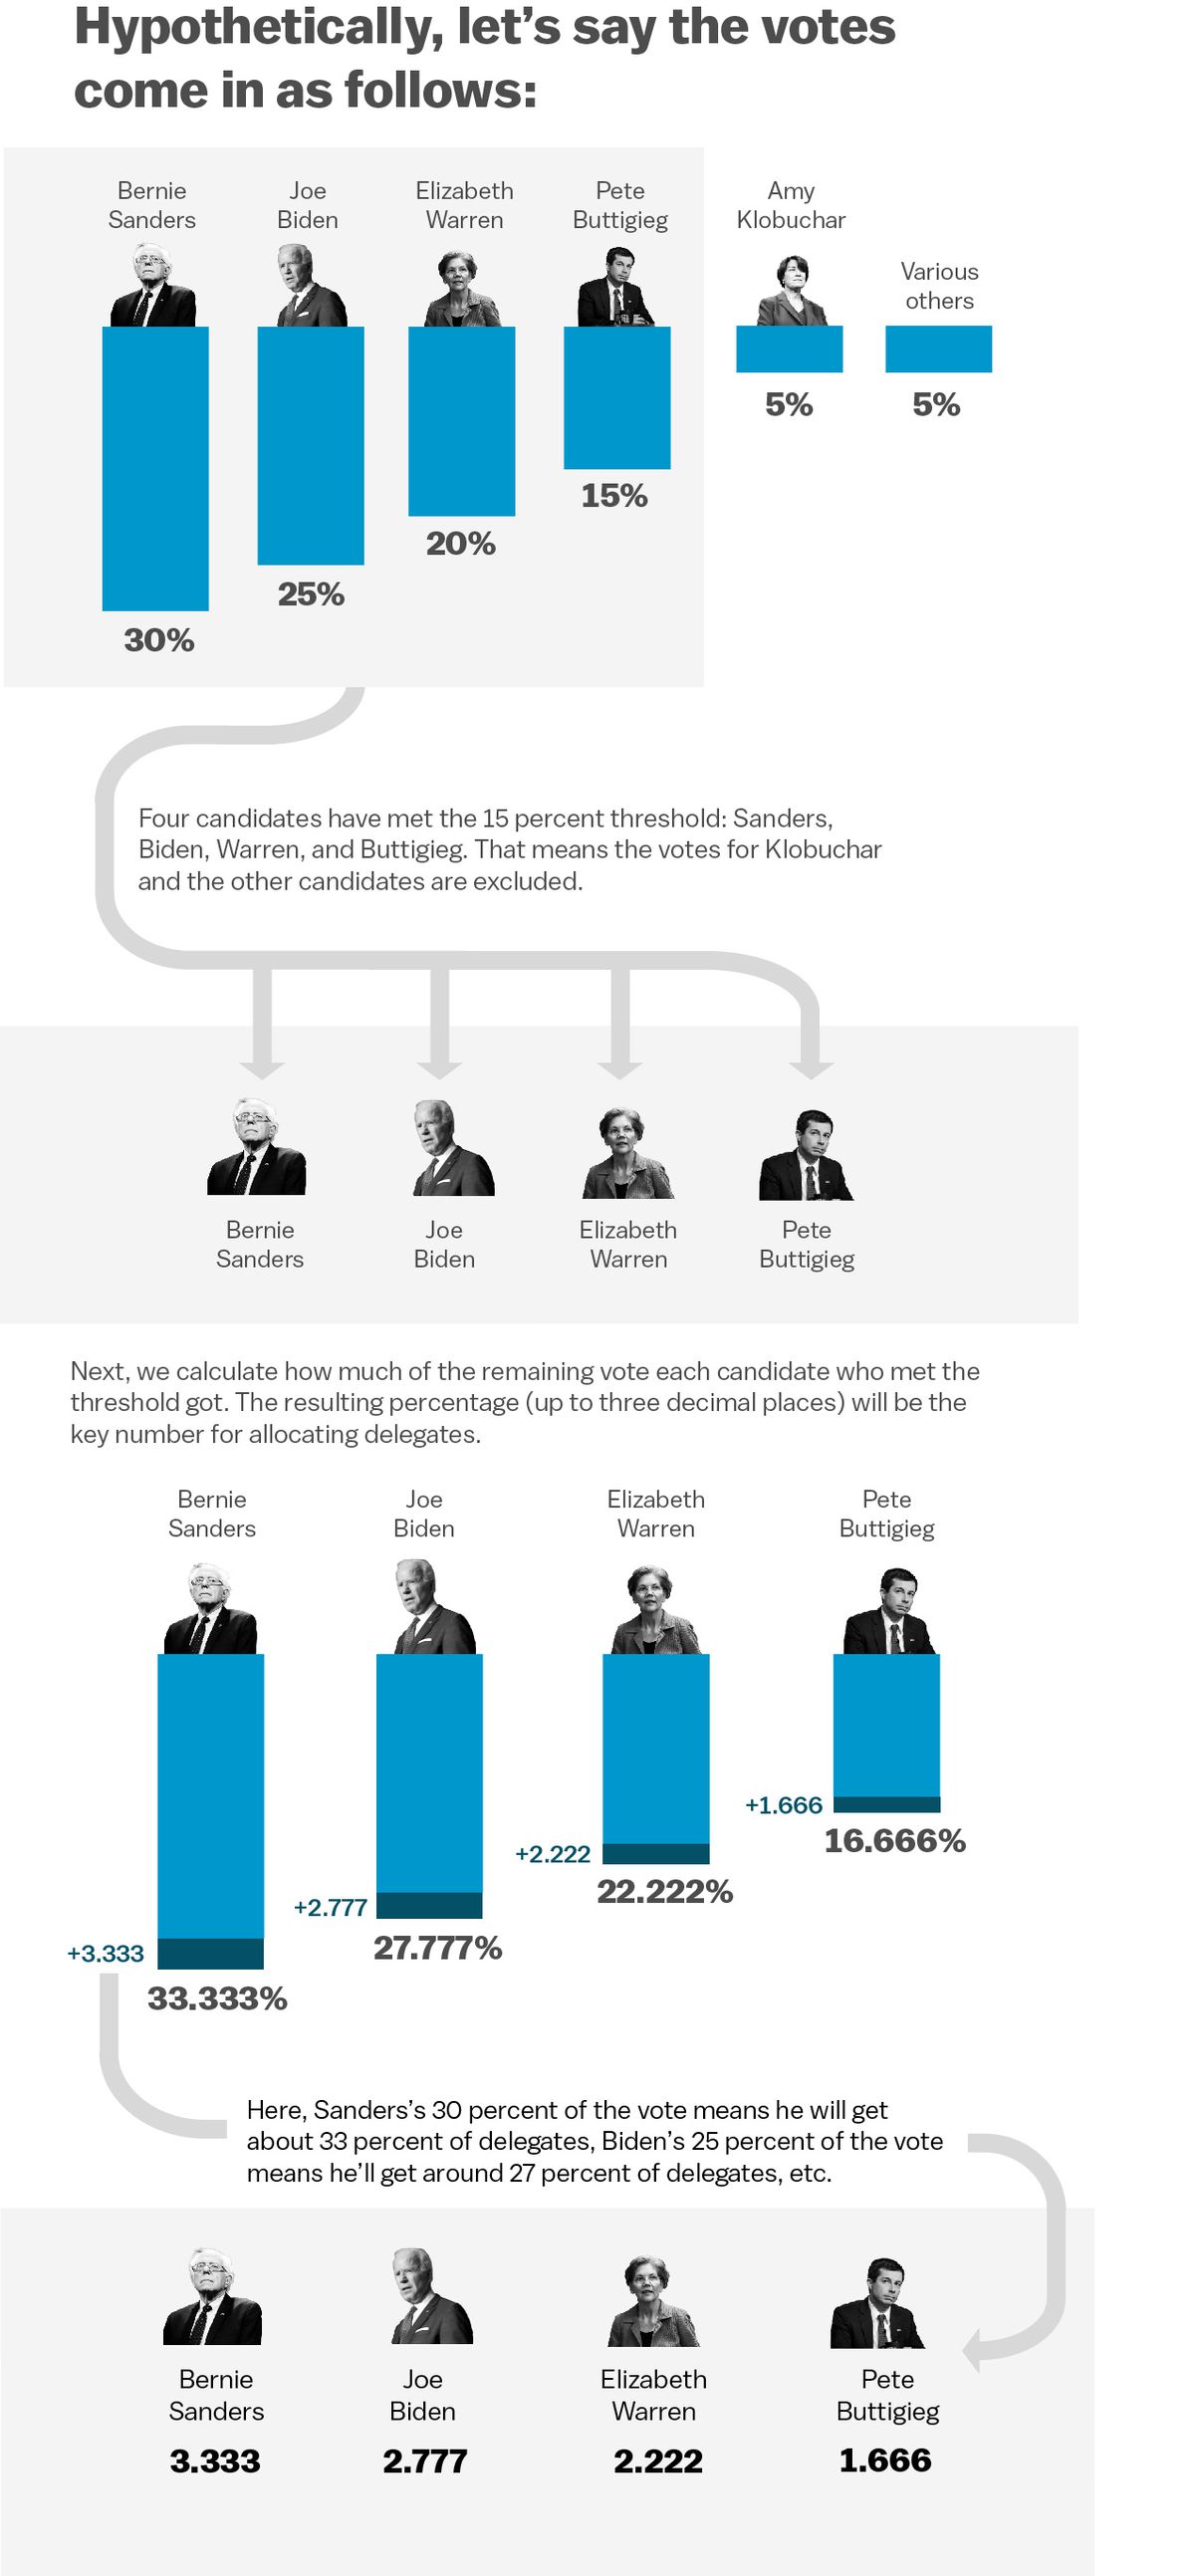 A flow chart showing a hypothetical tally of votes for candidates Bernie Sanders, Joe Biden, Elizabeth Warren, Pete Buttigieg, Amy Klobuchar and others. In this tally, Klobuchar does not meet the 15 percent threshold and is not eligible to get any delegates.